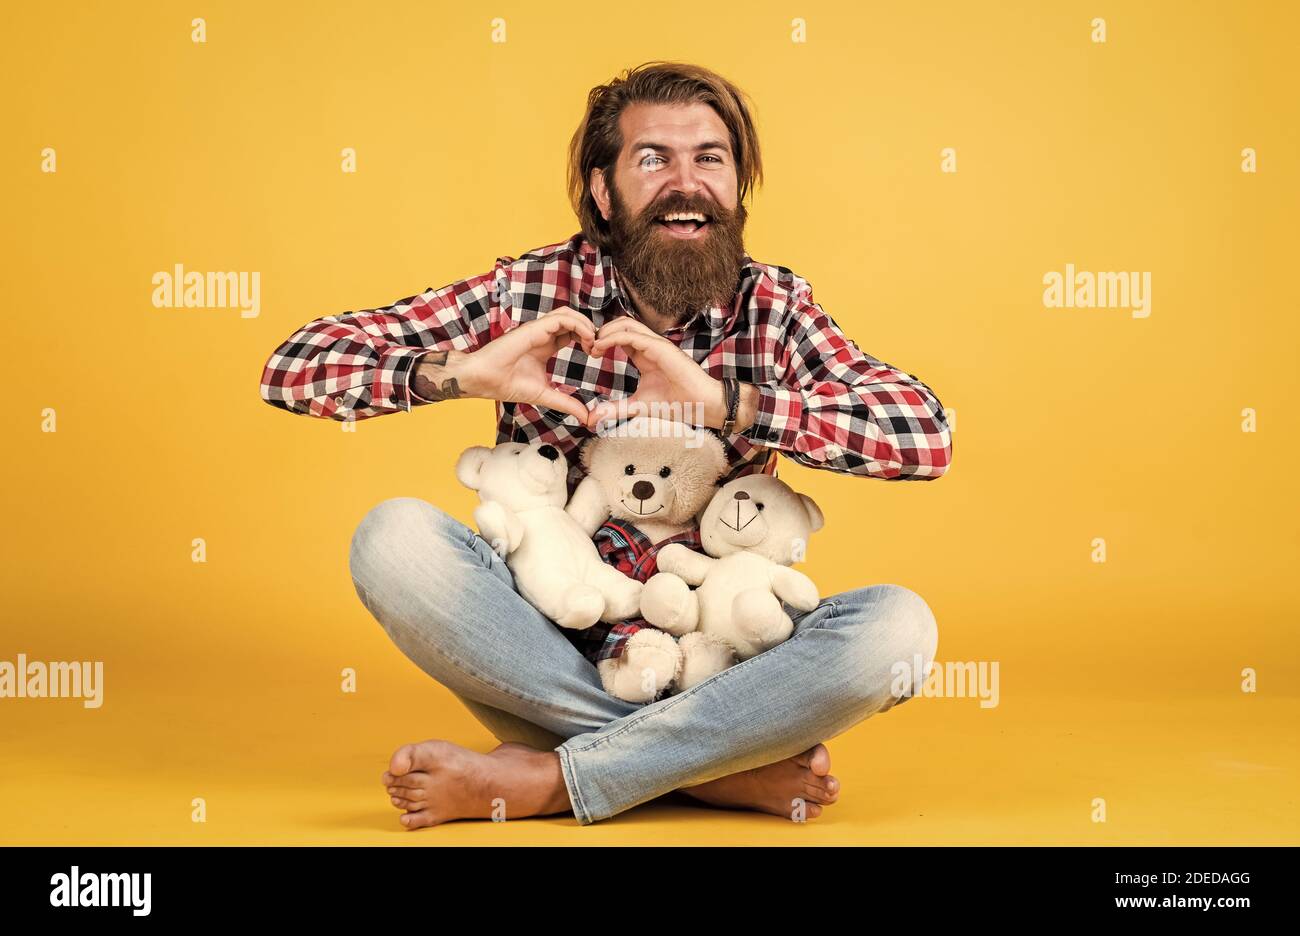 my heart is yours. Man with beard hold cute toy bear. Man holds teddy bear. Gifts and holidays concept. This is for you. hipster like animal toy. Birthday holiday party celebration. feel happiness. Stock Photo